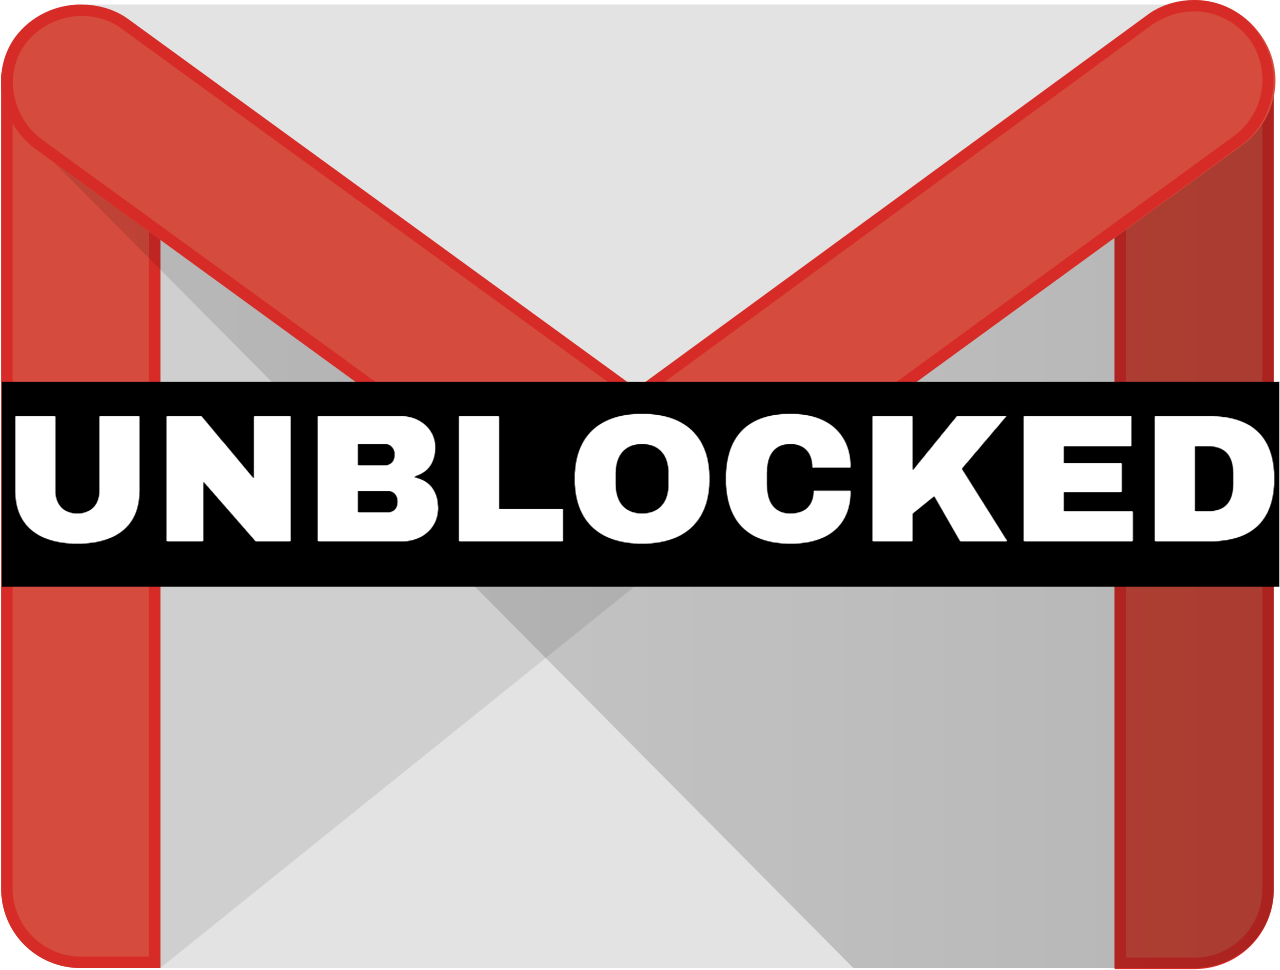 How To Unblock Someone on Gmail